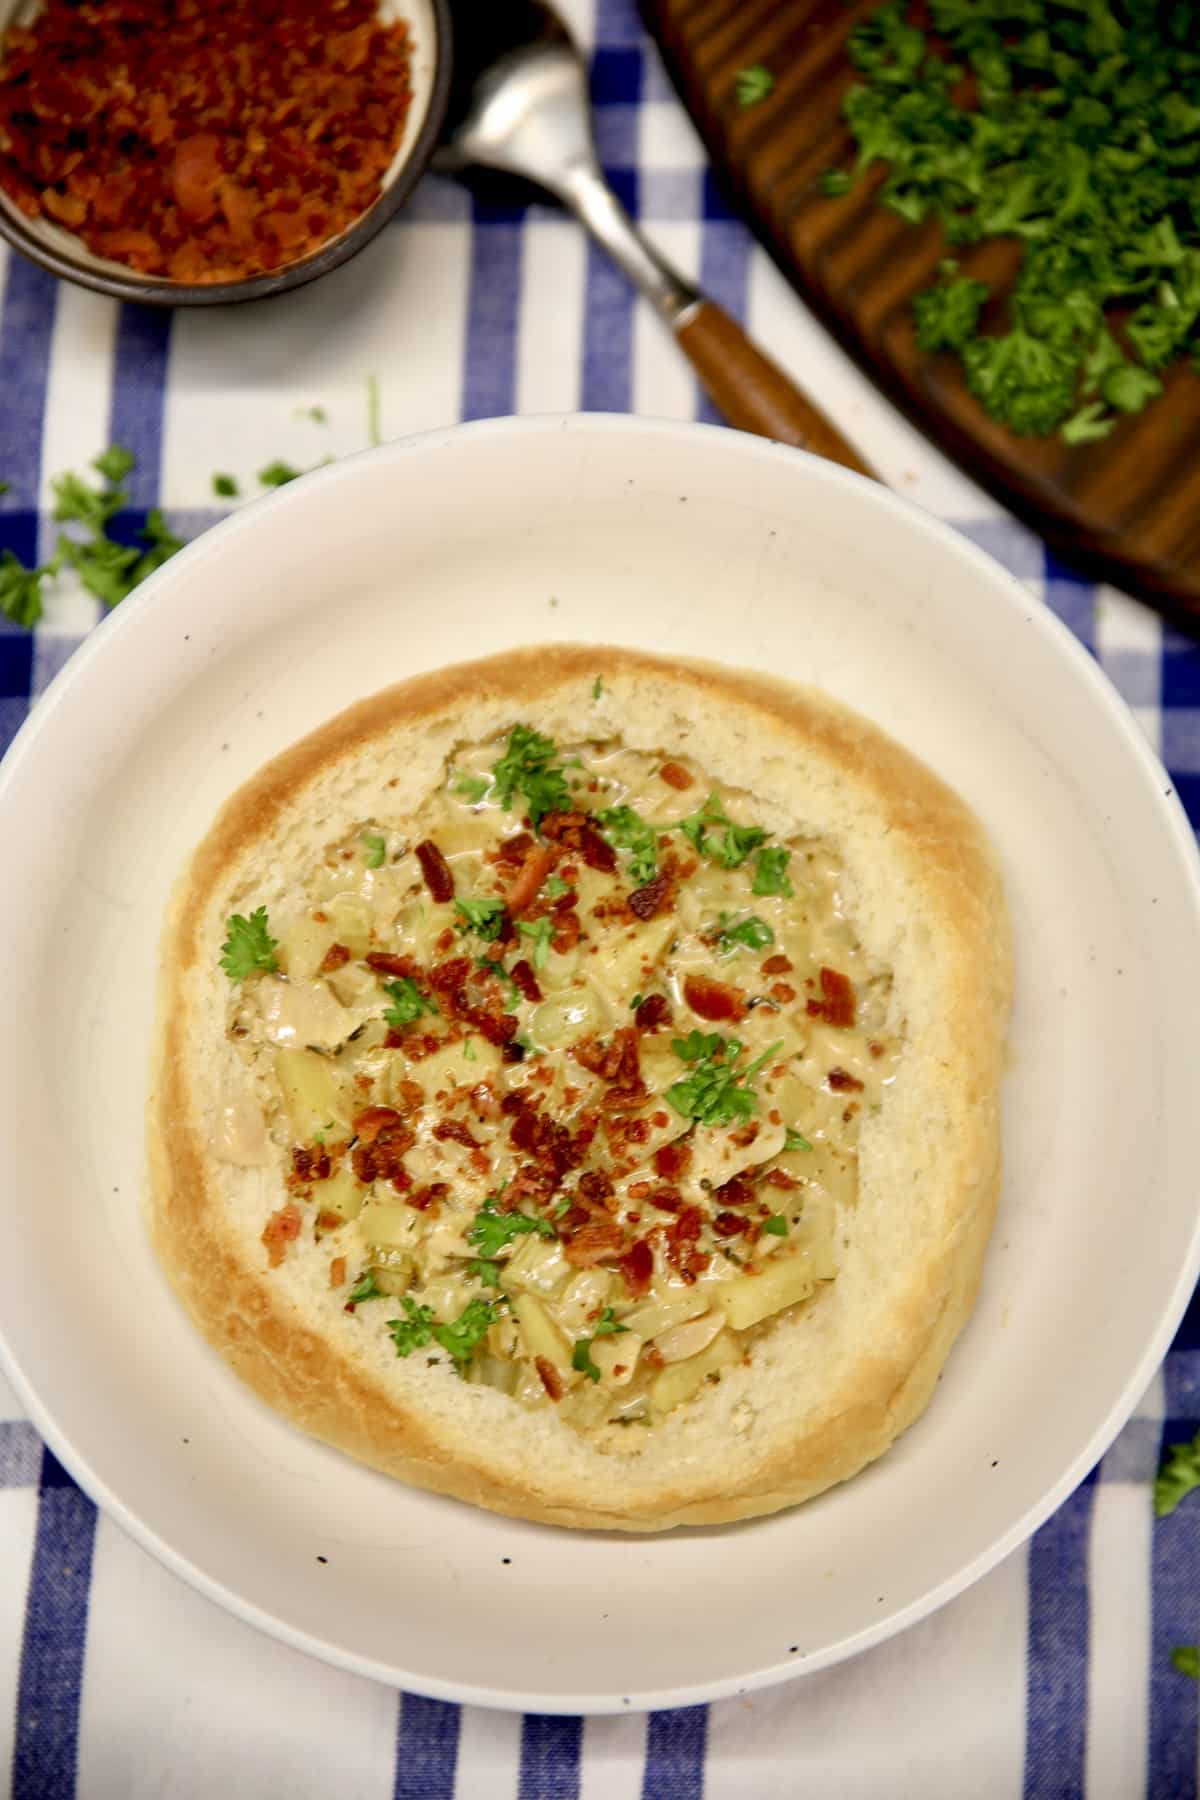 Bread Bowl of Clam chowder garnished with bacon and parsley.